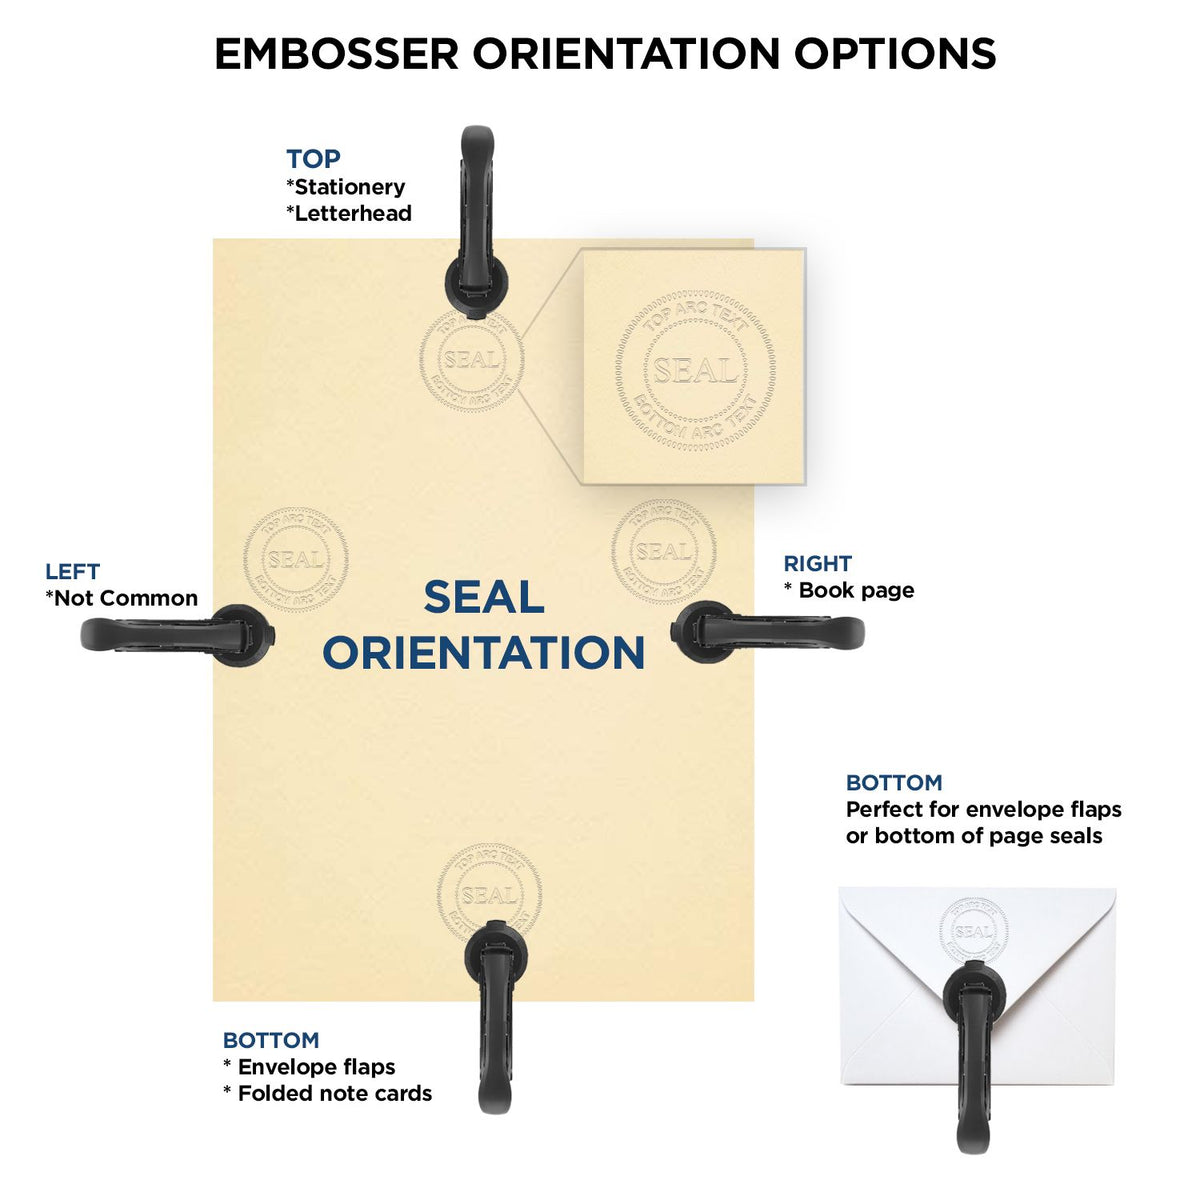 An infographic for the State of Nebraska Architectural Seal Embosser showing embosser orientation, this is showing examples of a top, bottom, right and left insert.